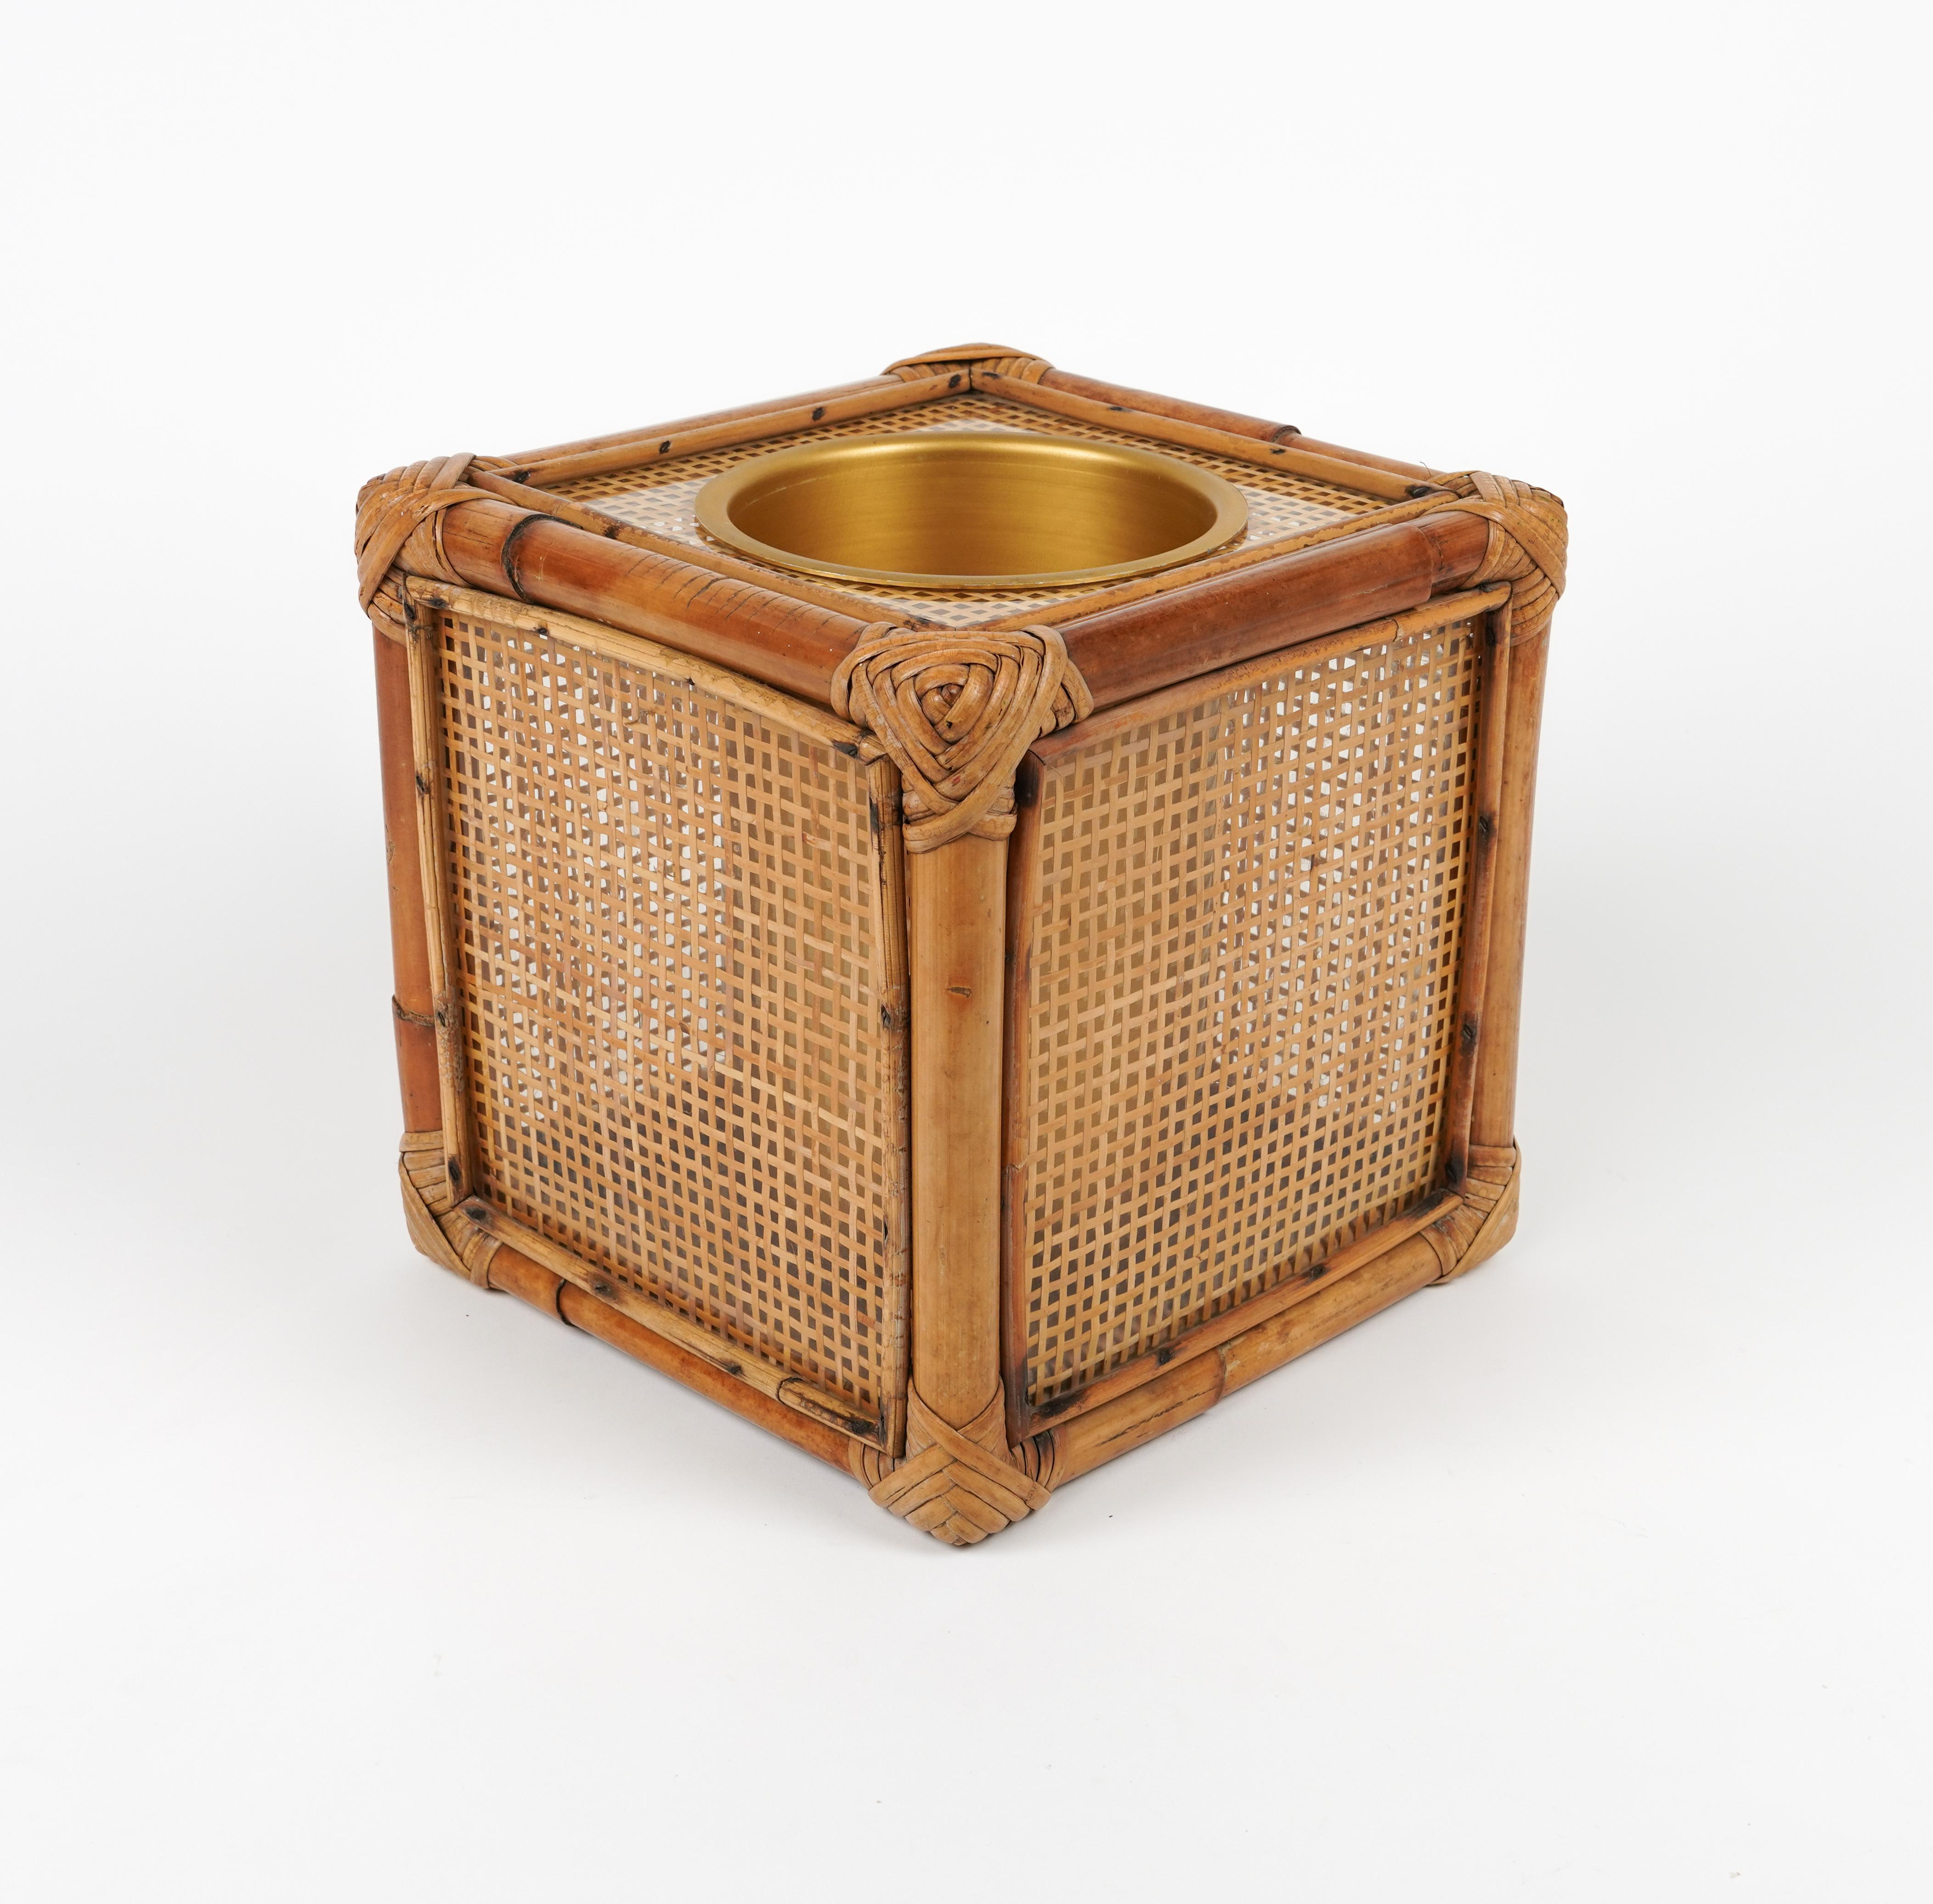 Ice Bucket in Bamboo, Rattan and Lucite Christian Dior Style, Italy 1970s For Sale 4